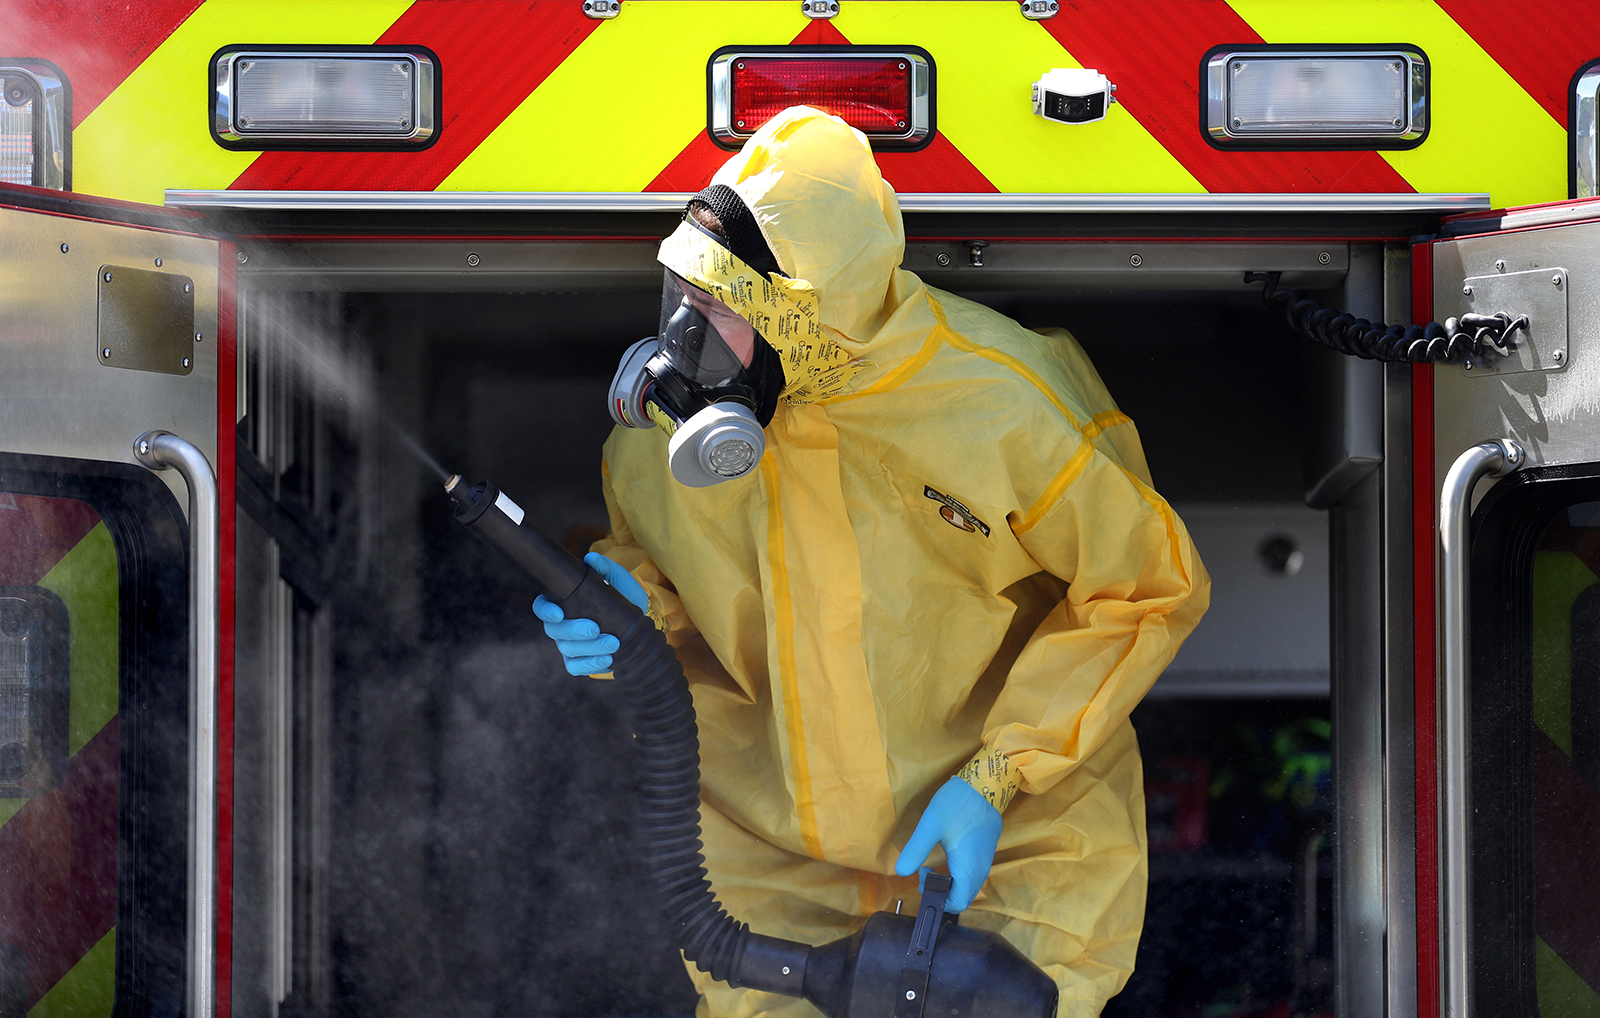 A worker with CleanHarbors sprays disinfectant inside a Marin County Fire Department ambulance on April 14 in Greenbrae, California.